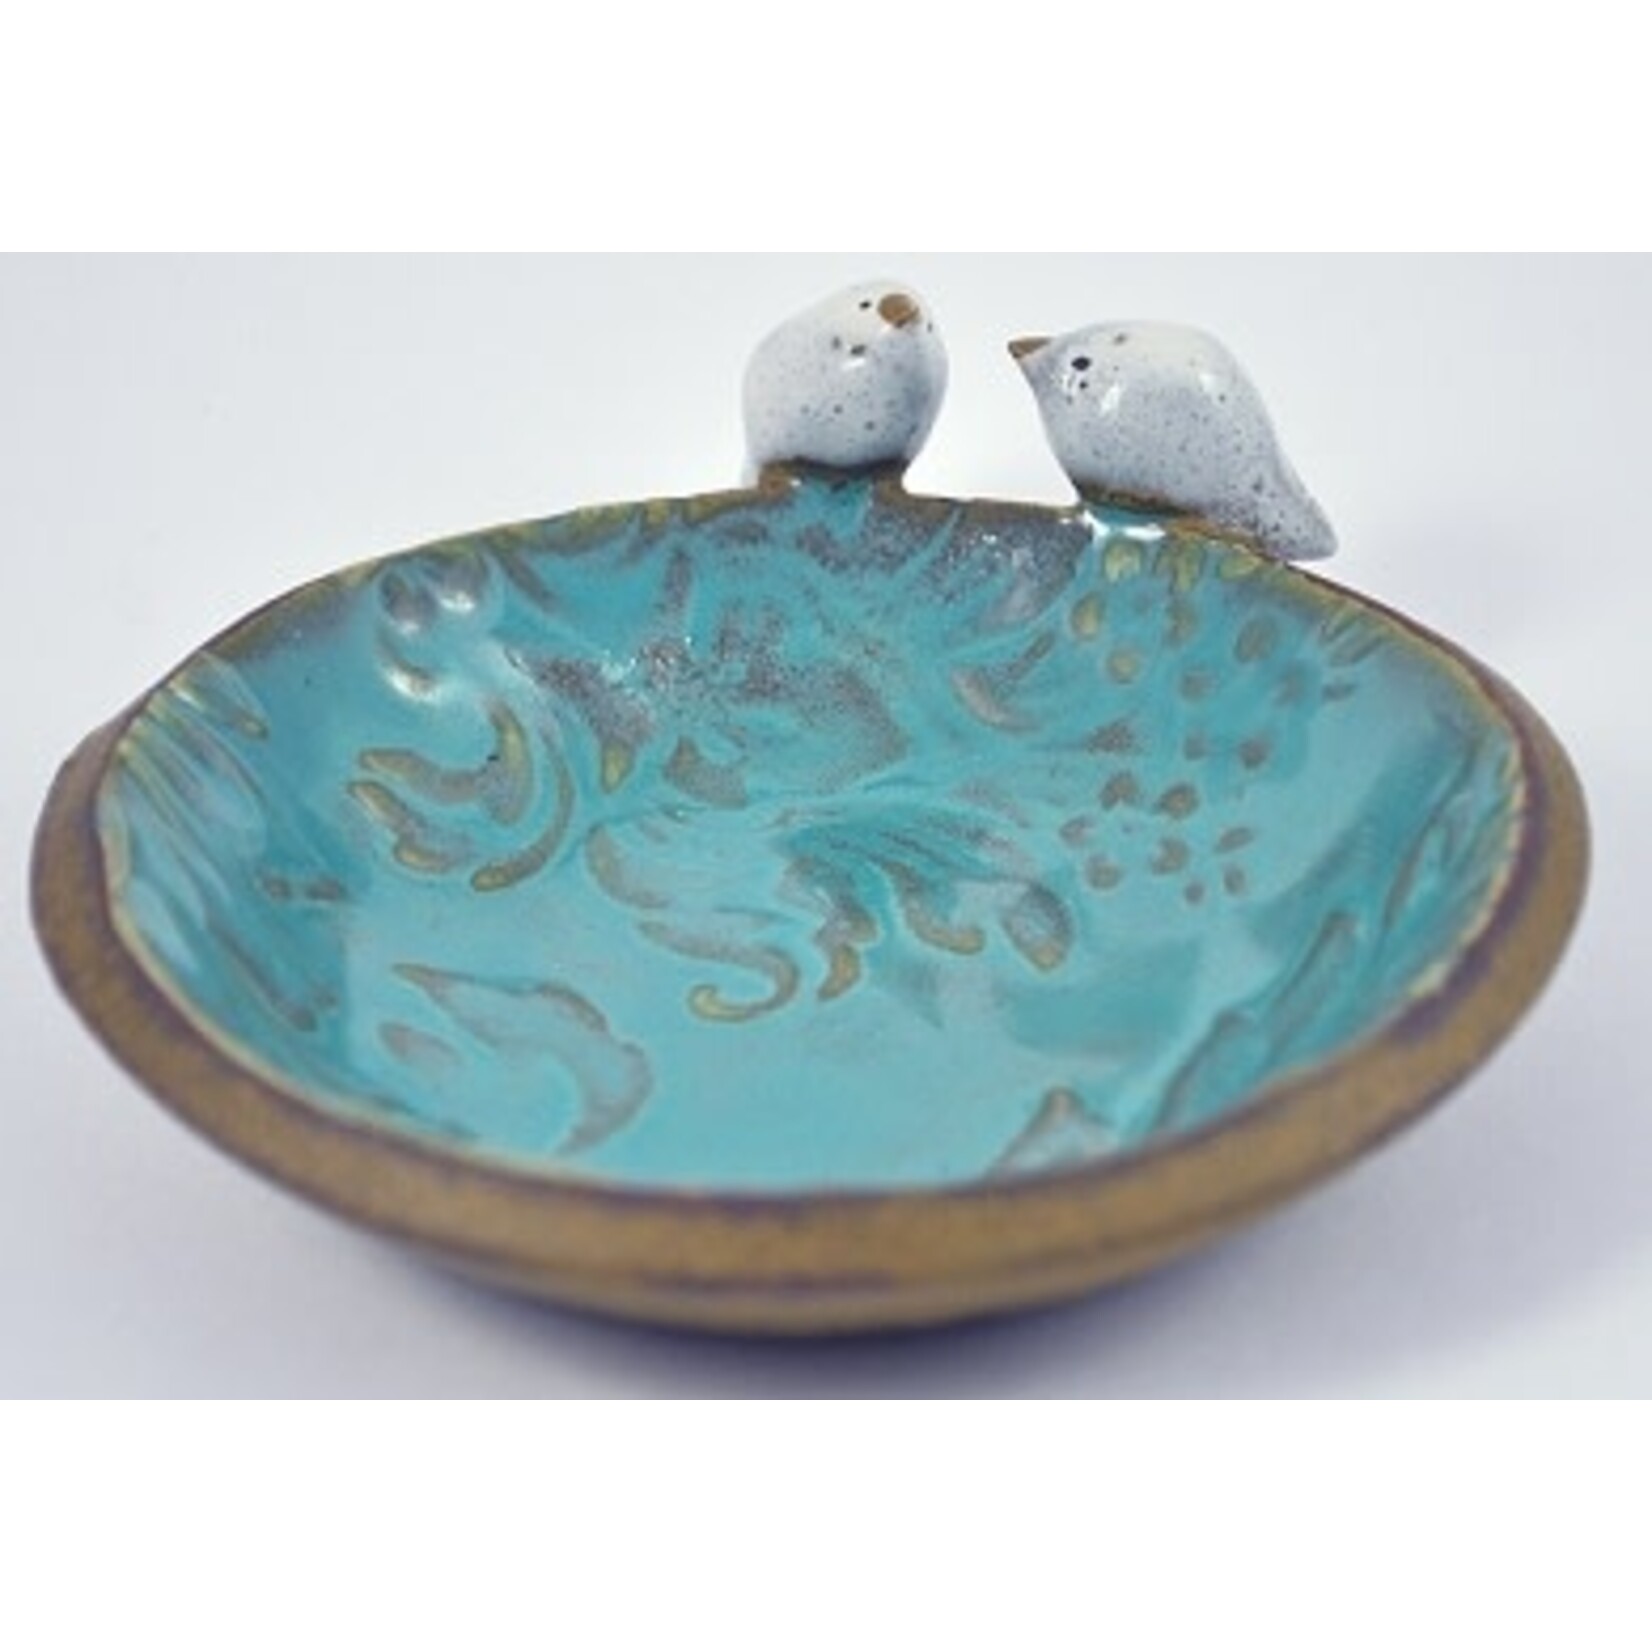 All Fired Up! Ltd. Turquoise Bird Bowl